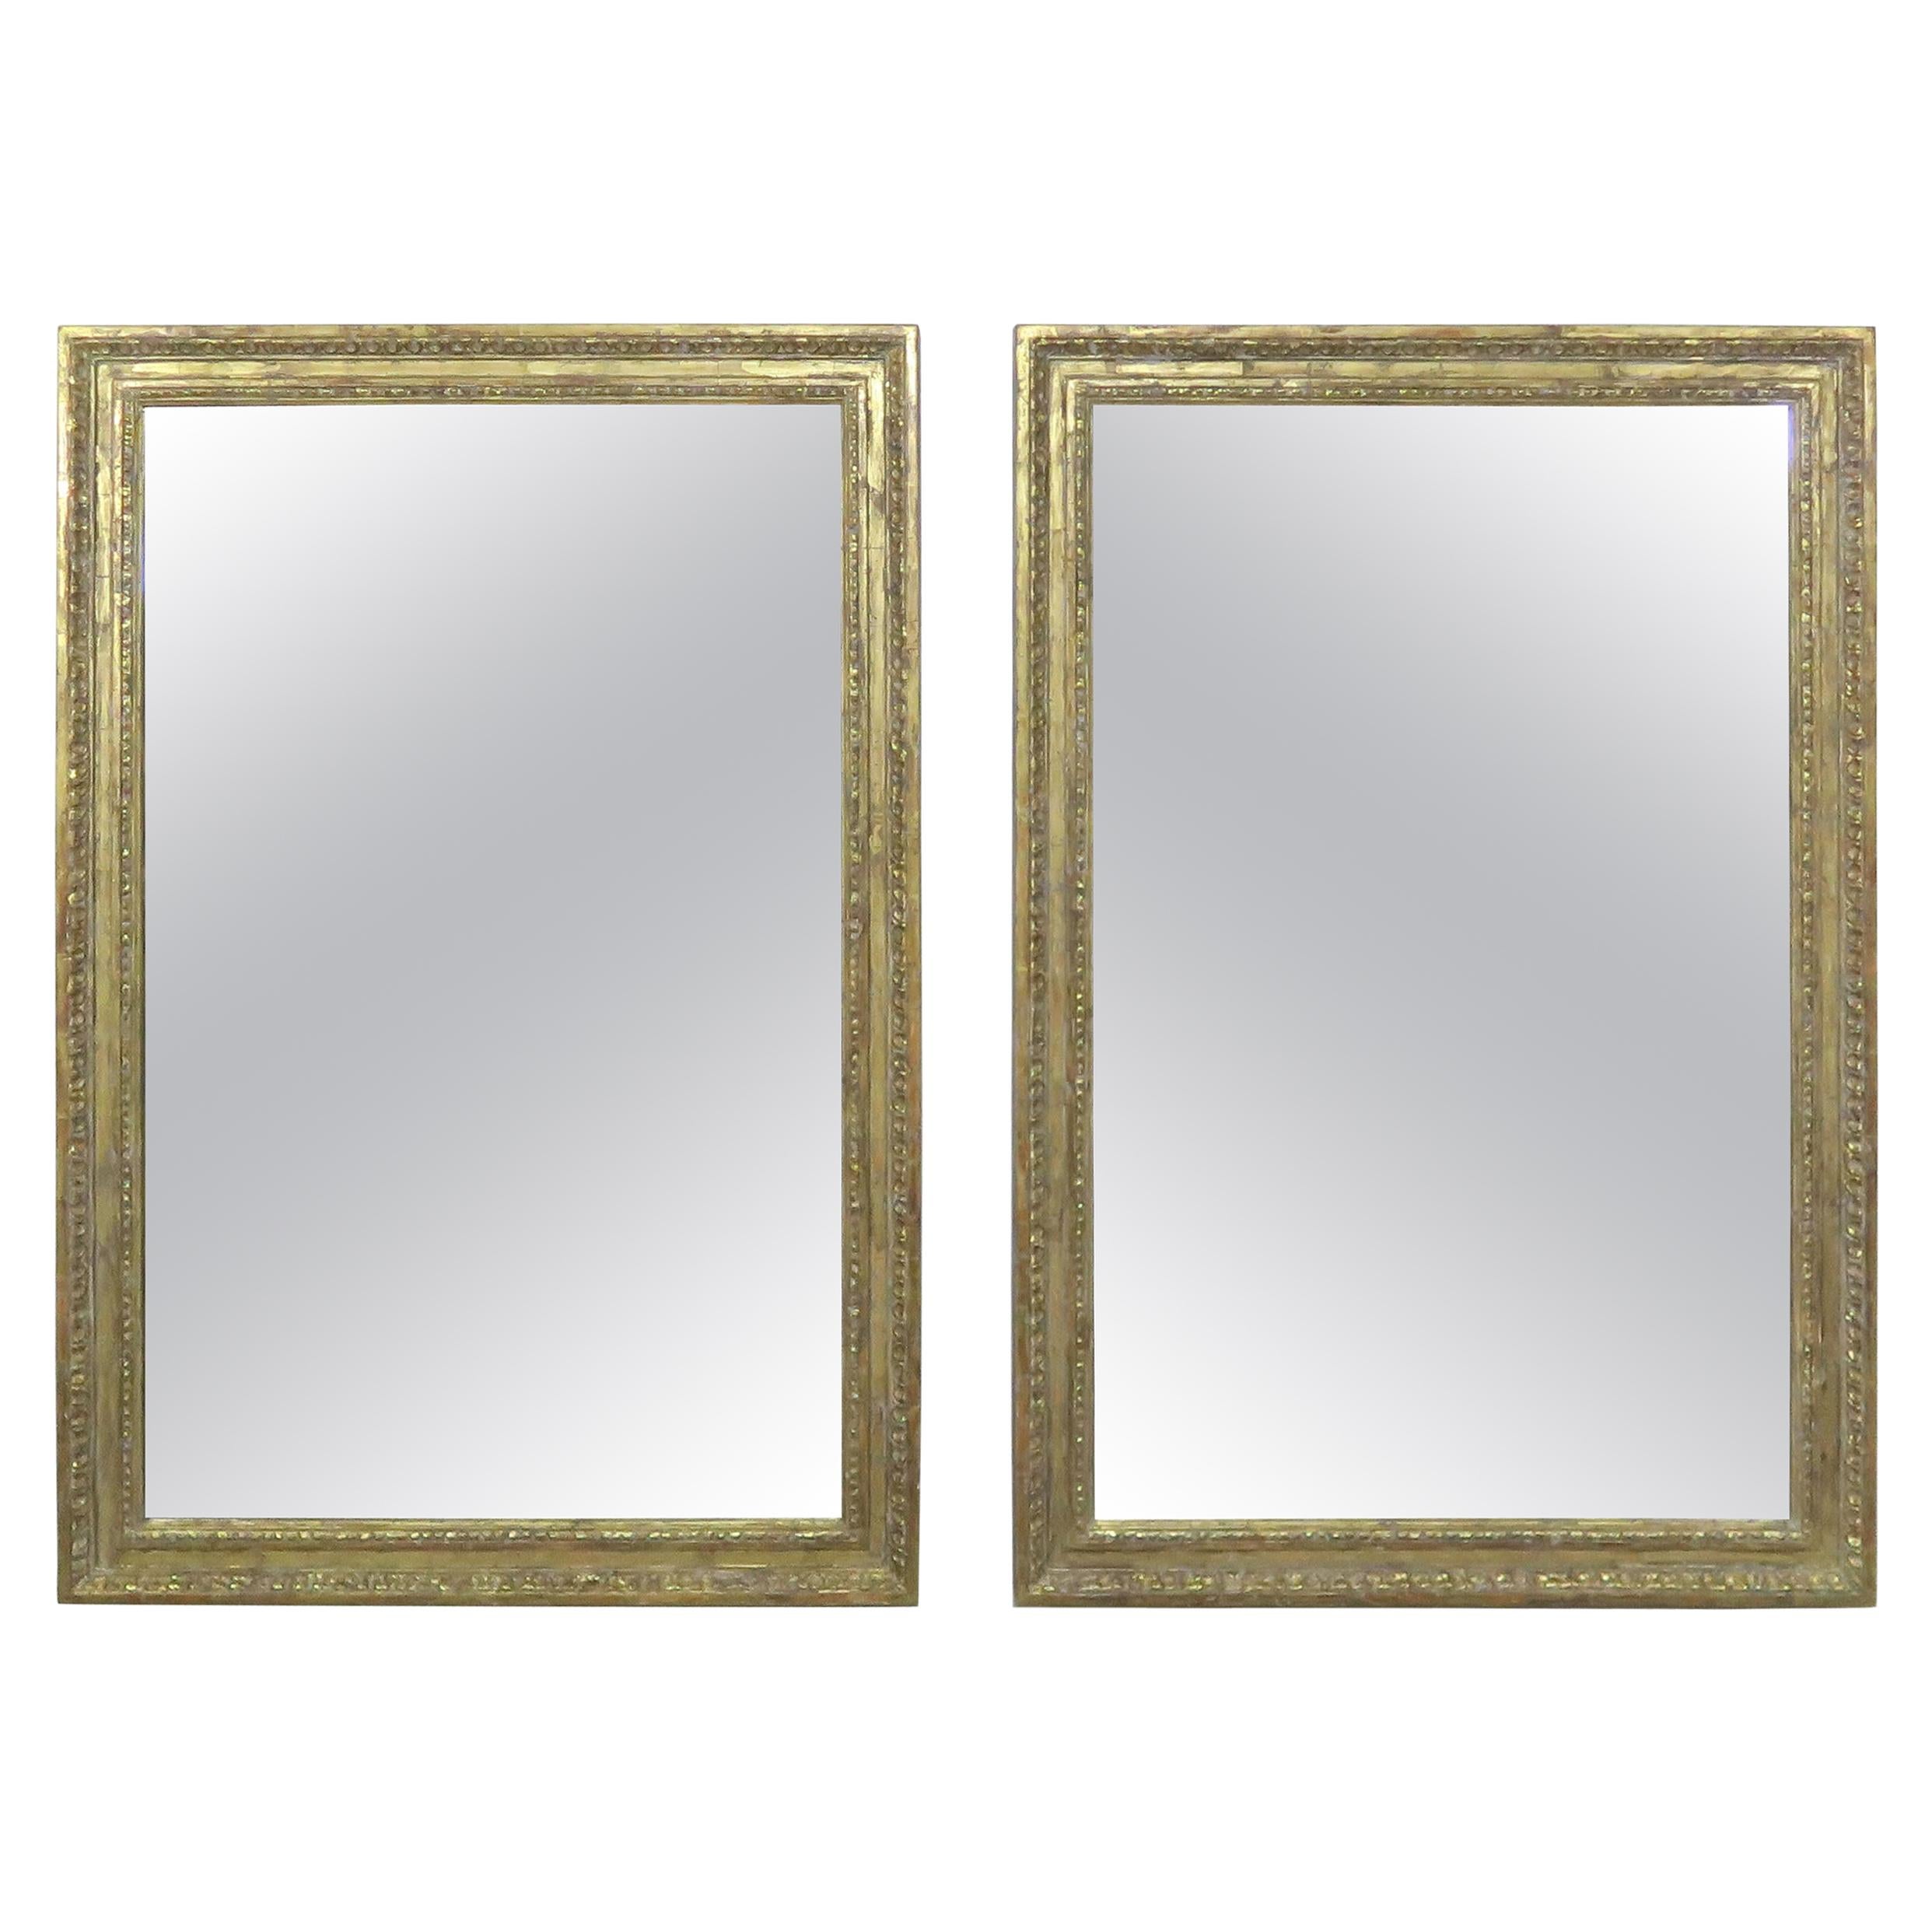 Pair of 22-Karat Gold Leaf Carved Mirrors by Melissa Levinson